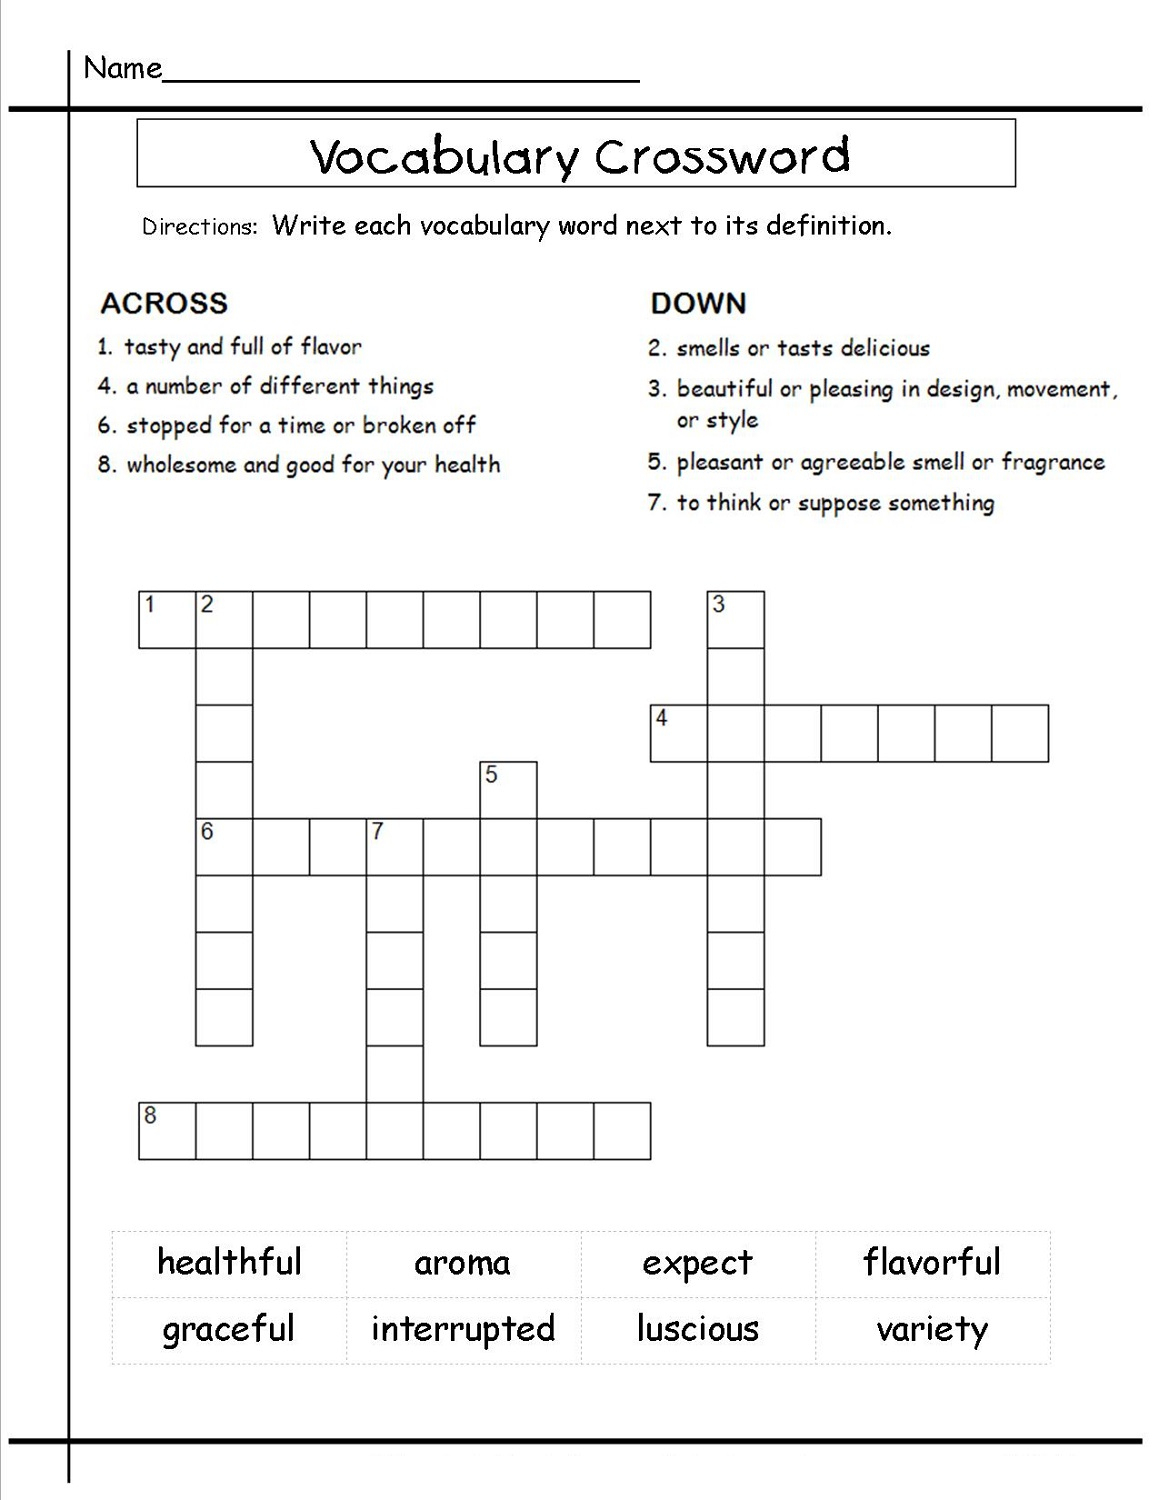 Crossword Puzzles For 5Th Graders | Activity Shelter - Printable Crossword Puzzles For 5Th Graders